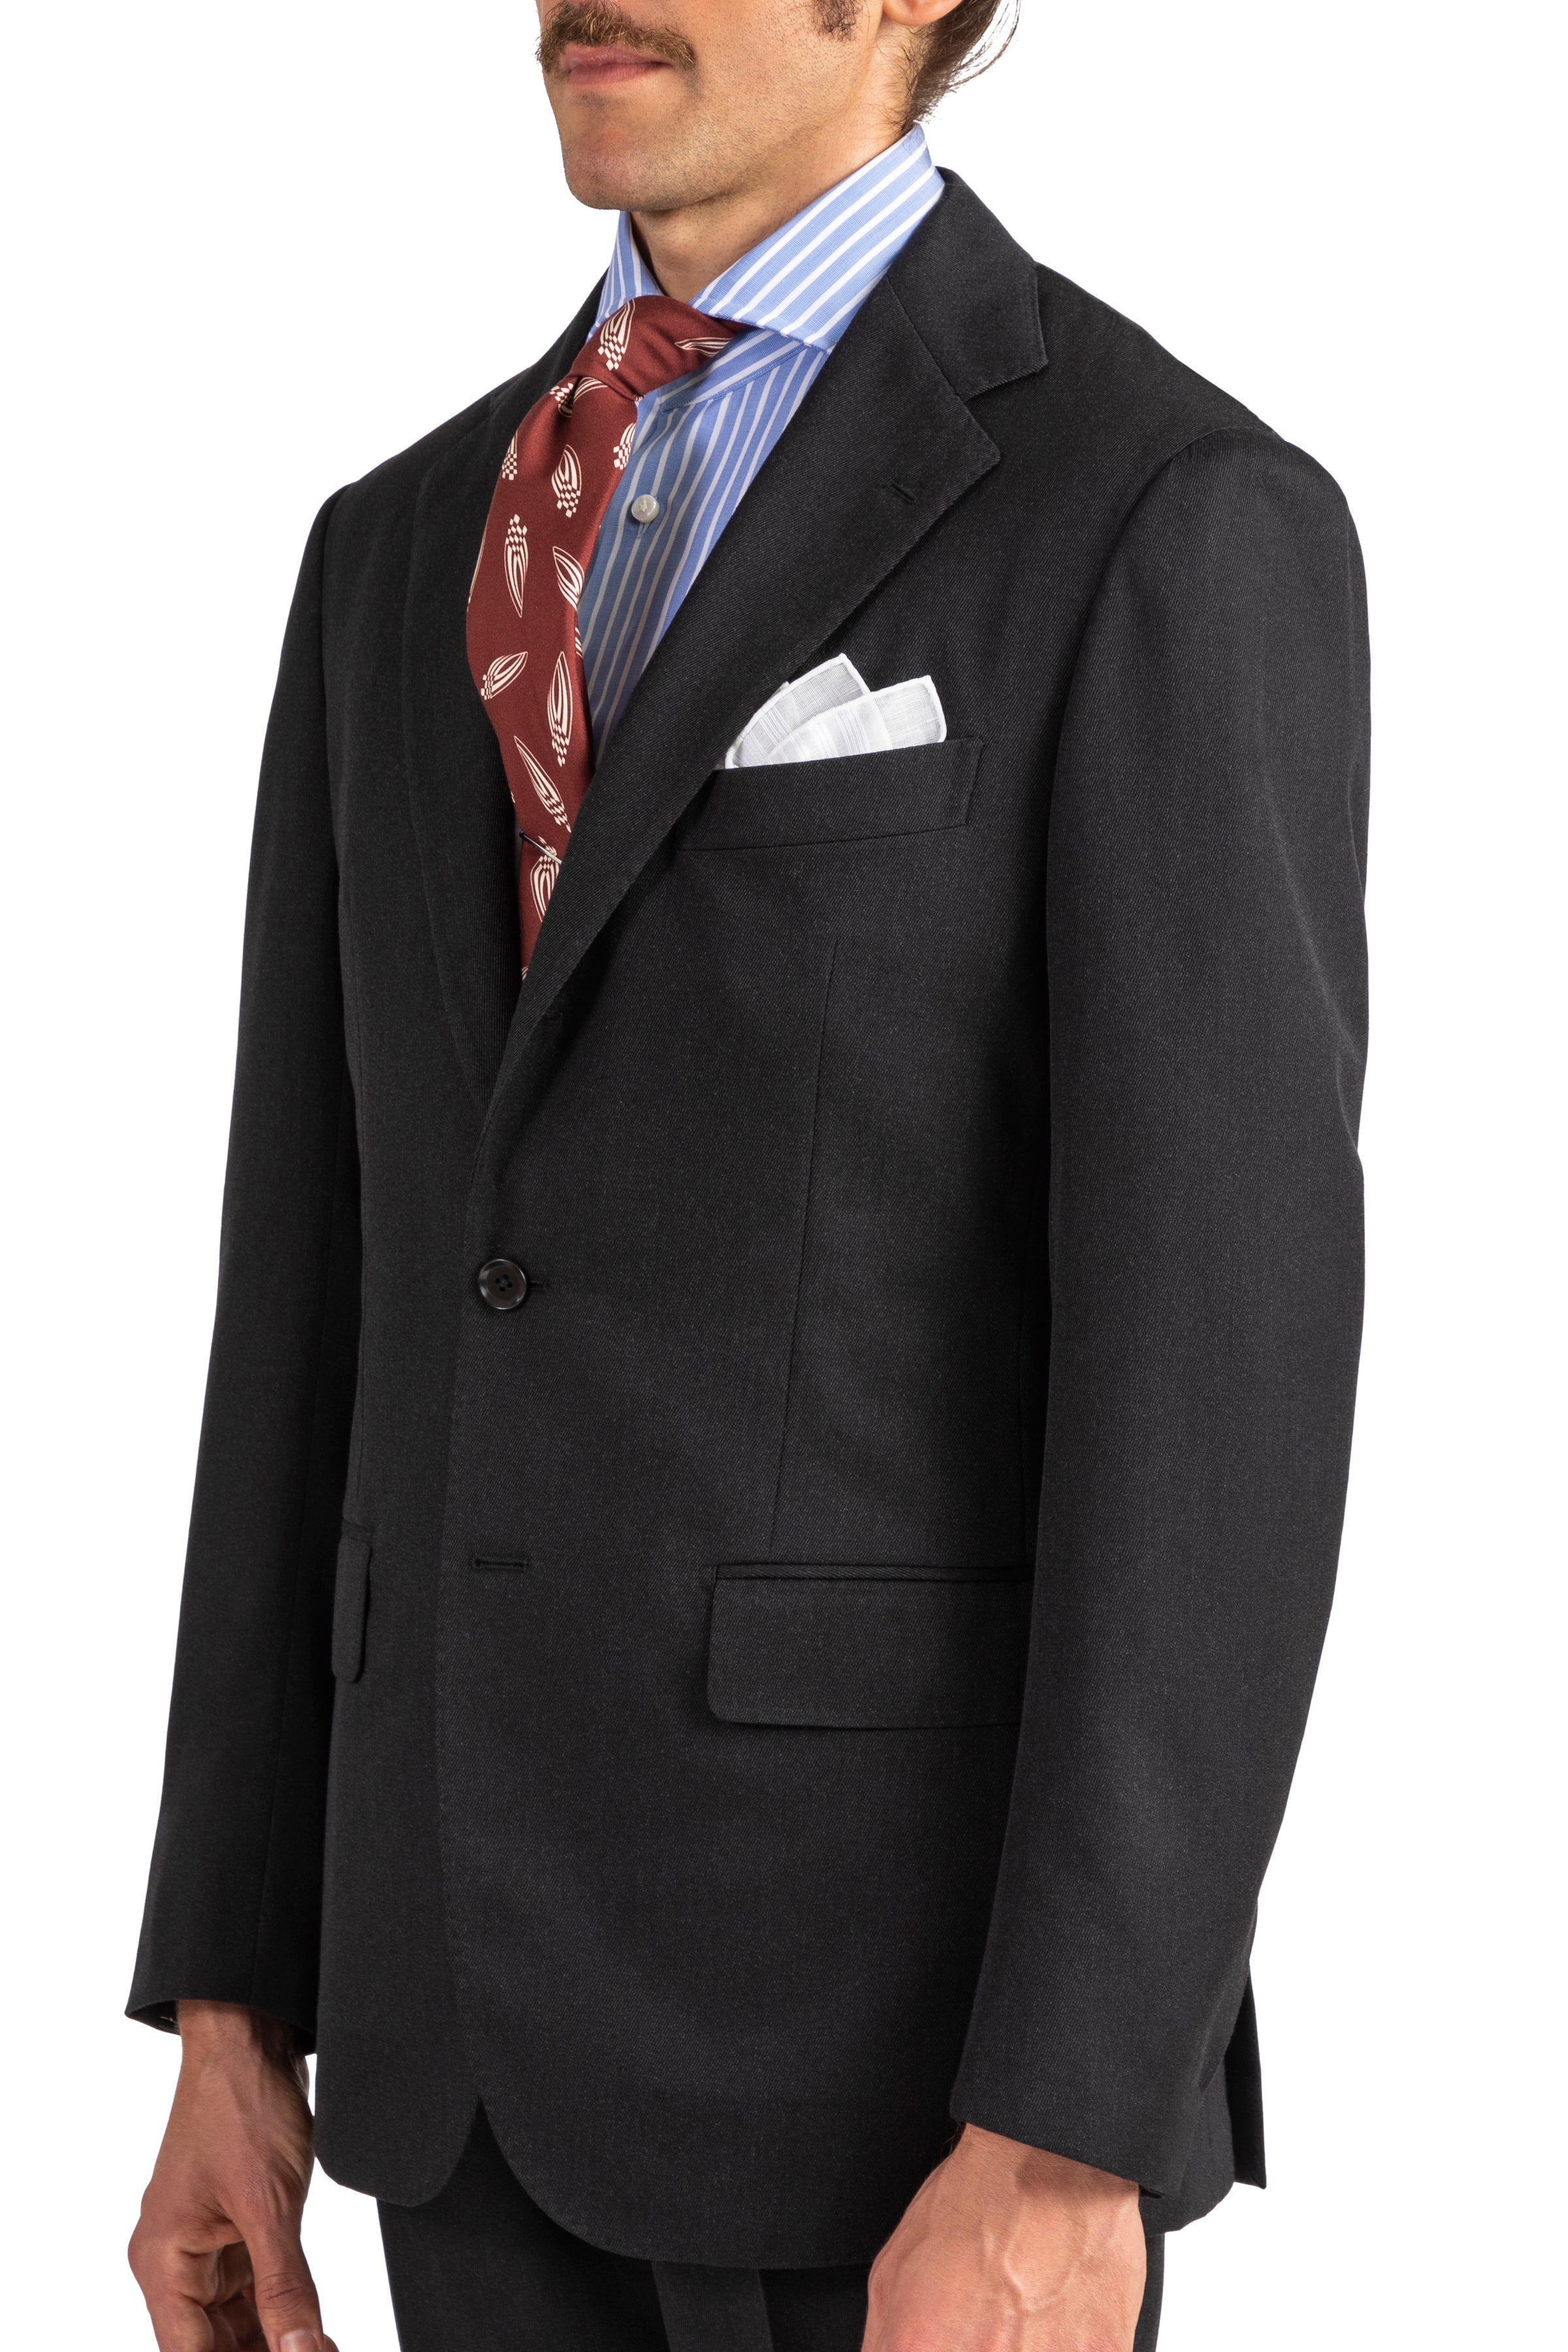 The Armoury Model 3A Dary Grey Covert Wool Suit